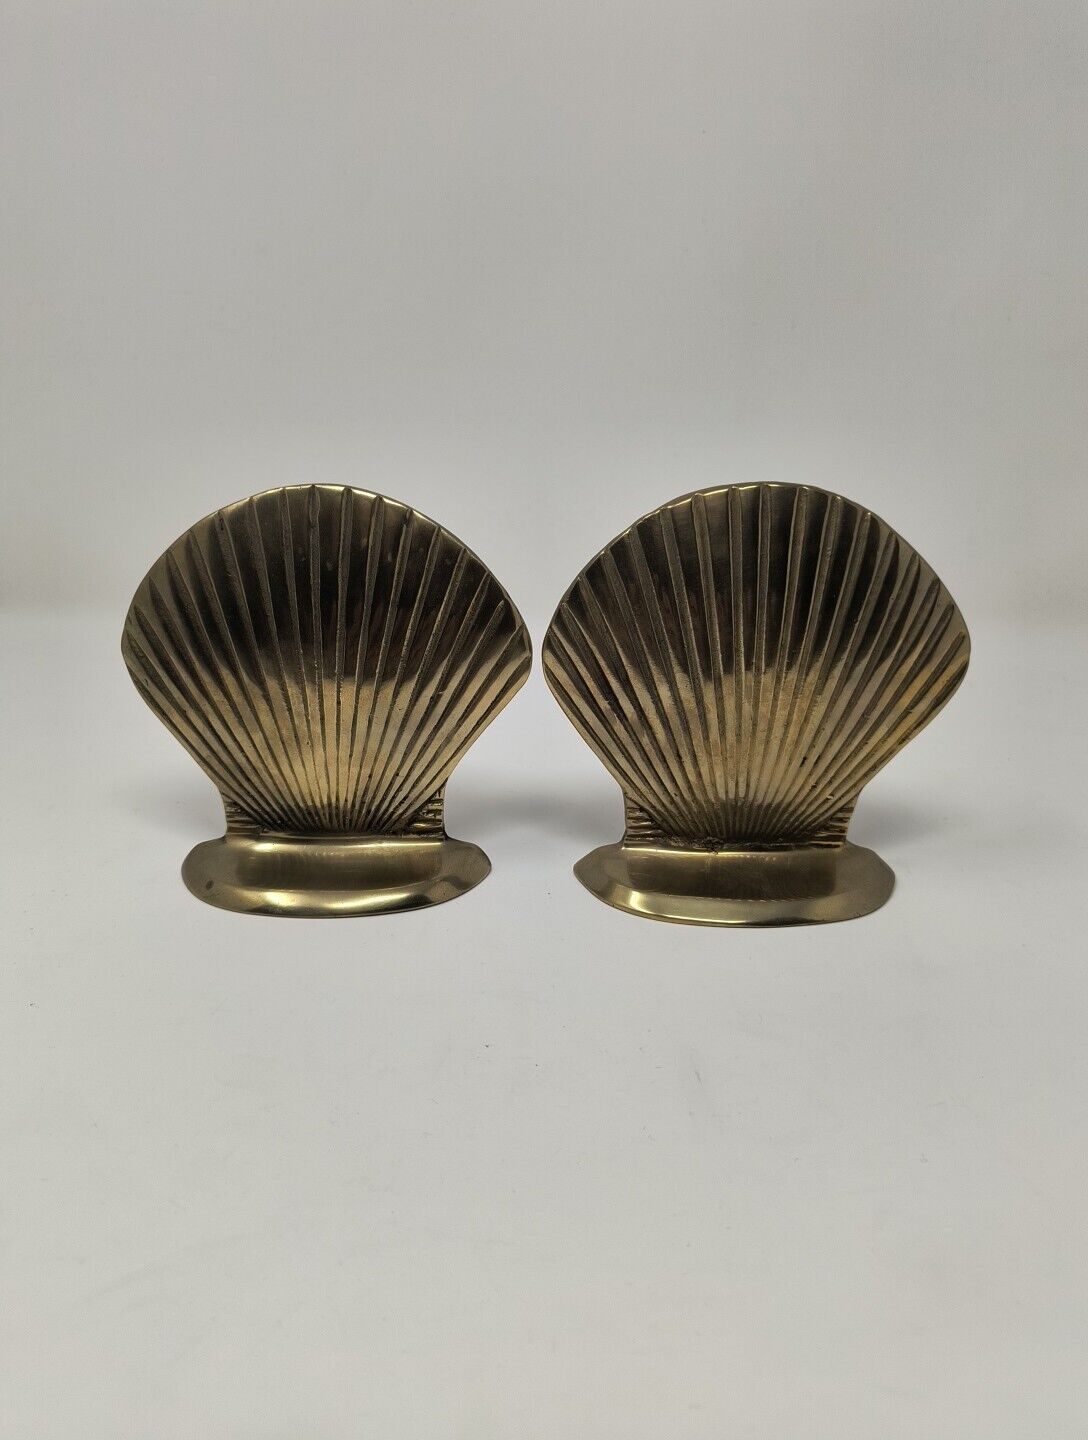 Vintage Pair Solid Brass Clam Sea Shell Book Ends Nautical Bookends Lot Of 2